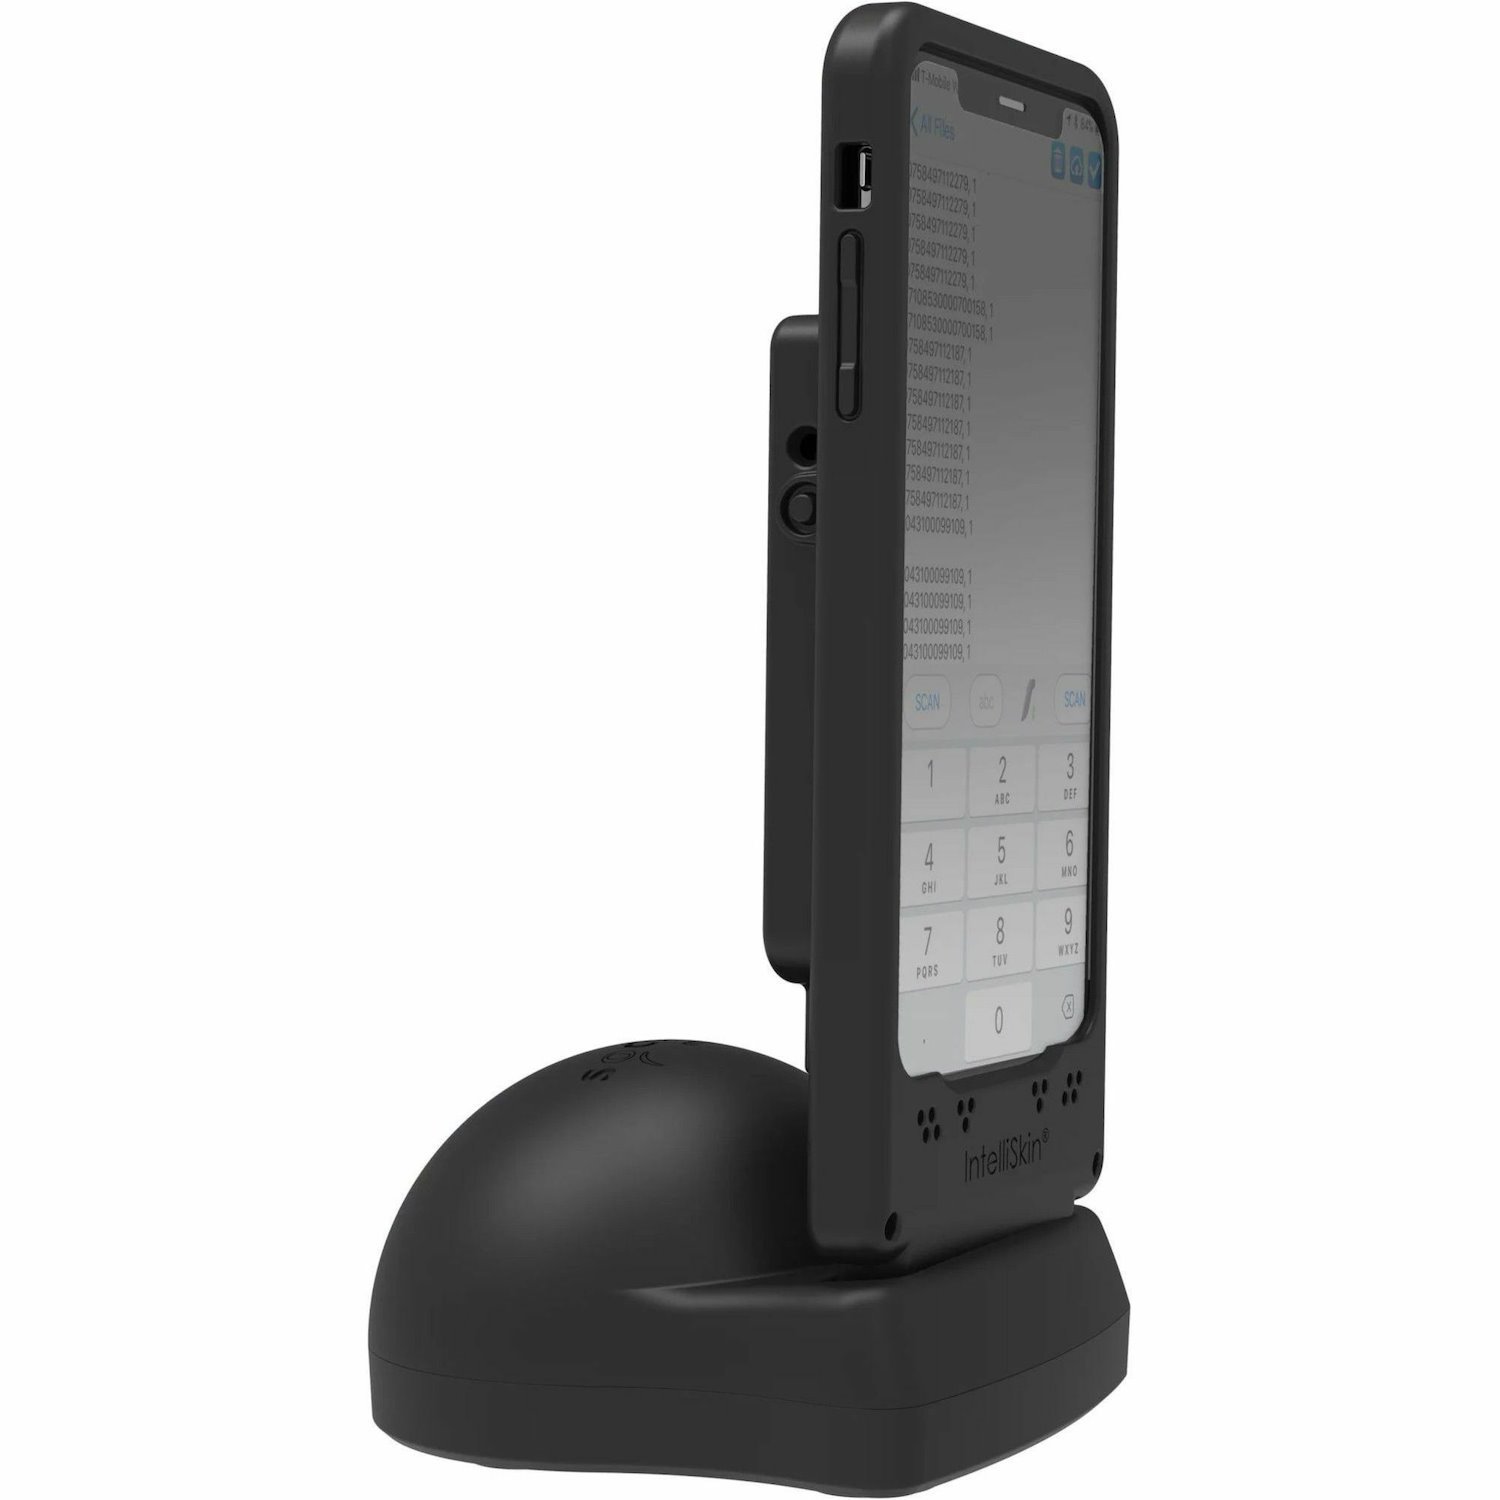 Socket Mobile DuraSled DS800 Rugged Retail, Healthcare, Logistics, Hospitality Handheld Barcode Scanner - Wireless Connectivity - USB Cable Included